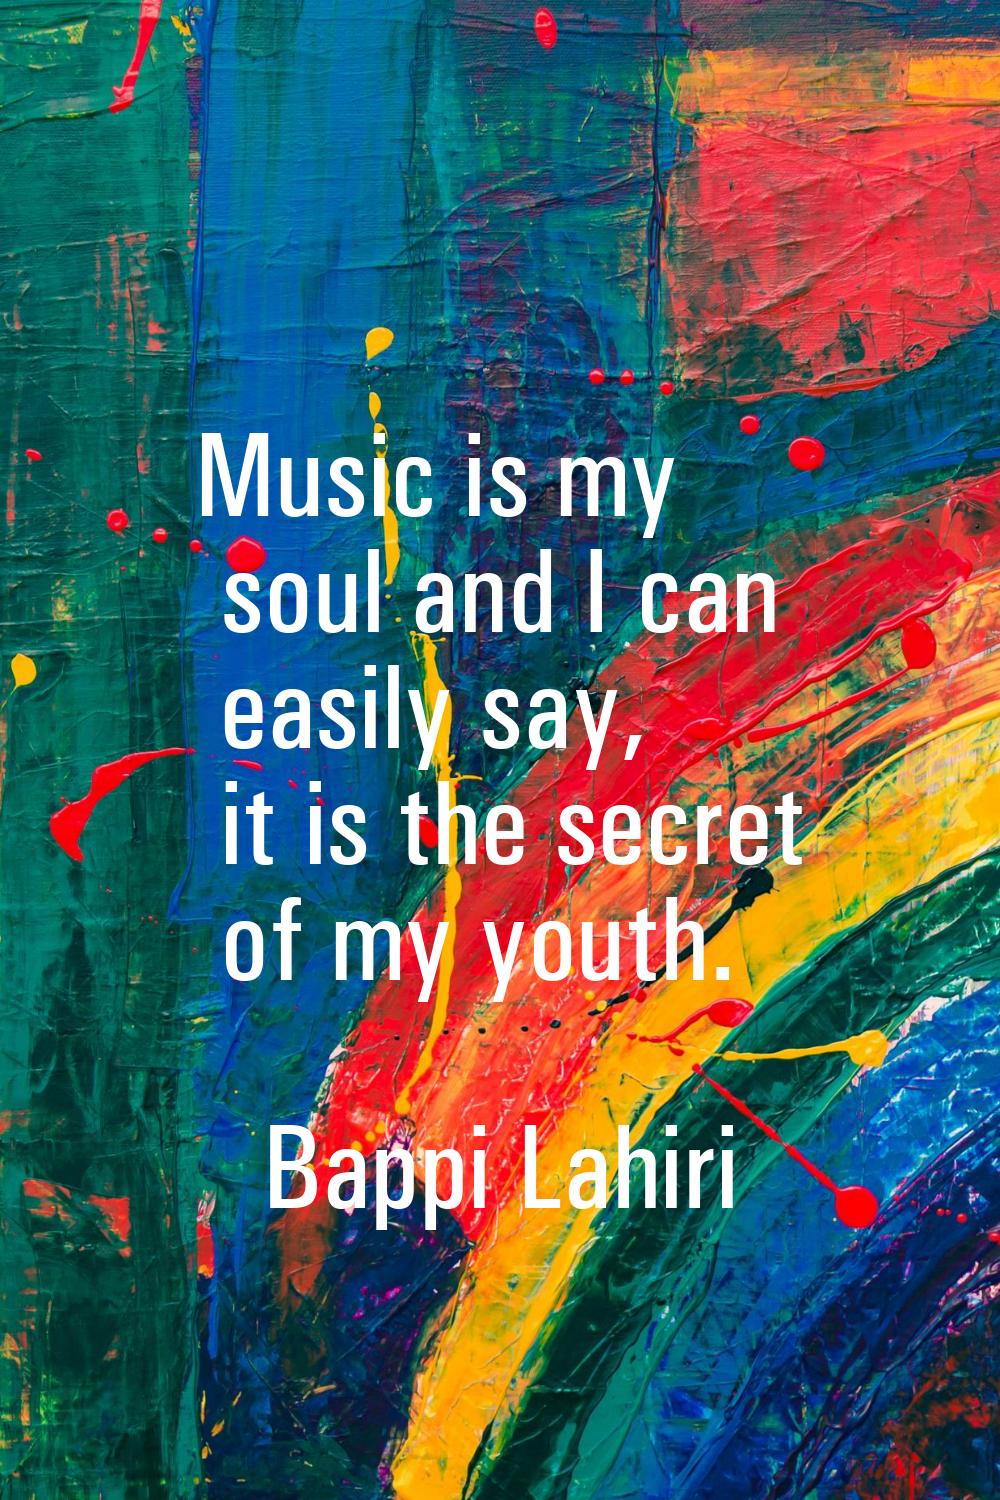 Music is my soul and I can easily say, it is the secret of my youth.